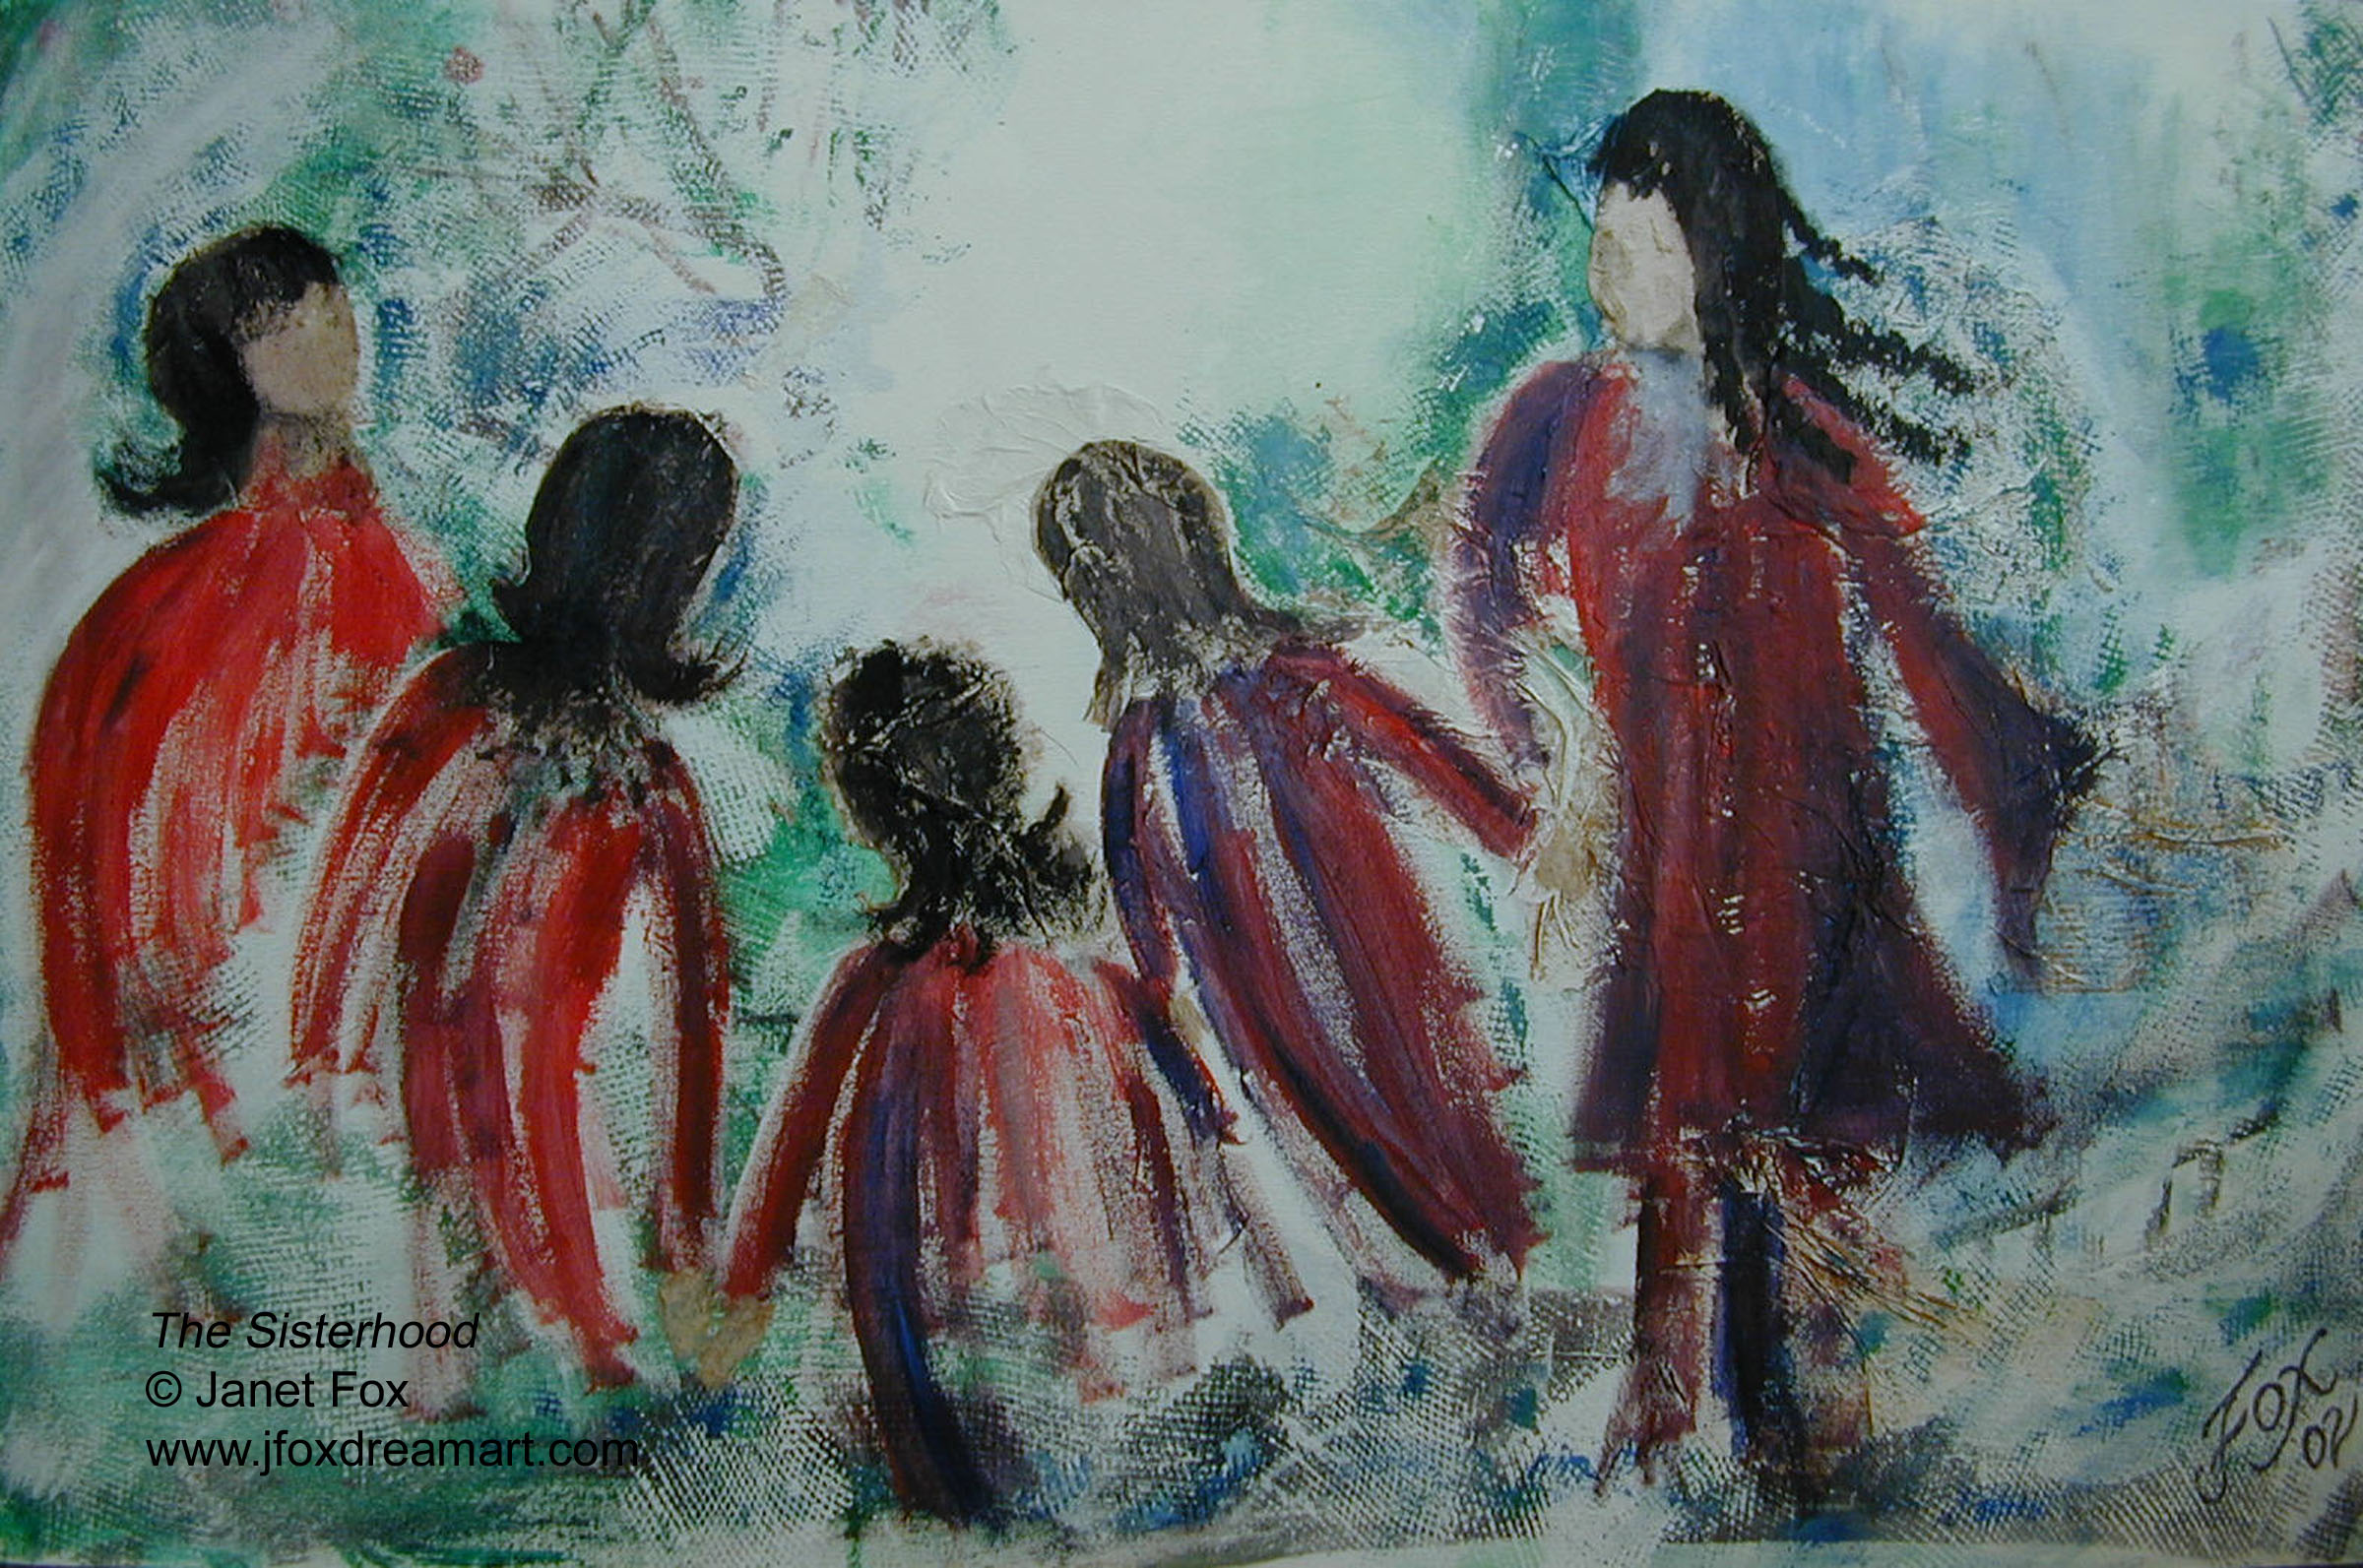 Image of a mixed media painting by Janet Fox titled "The Sisterhood."